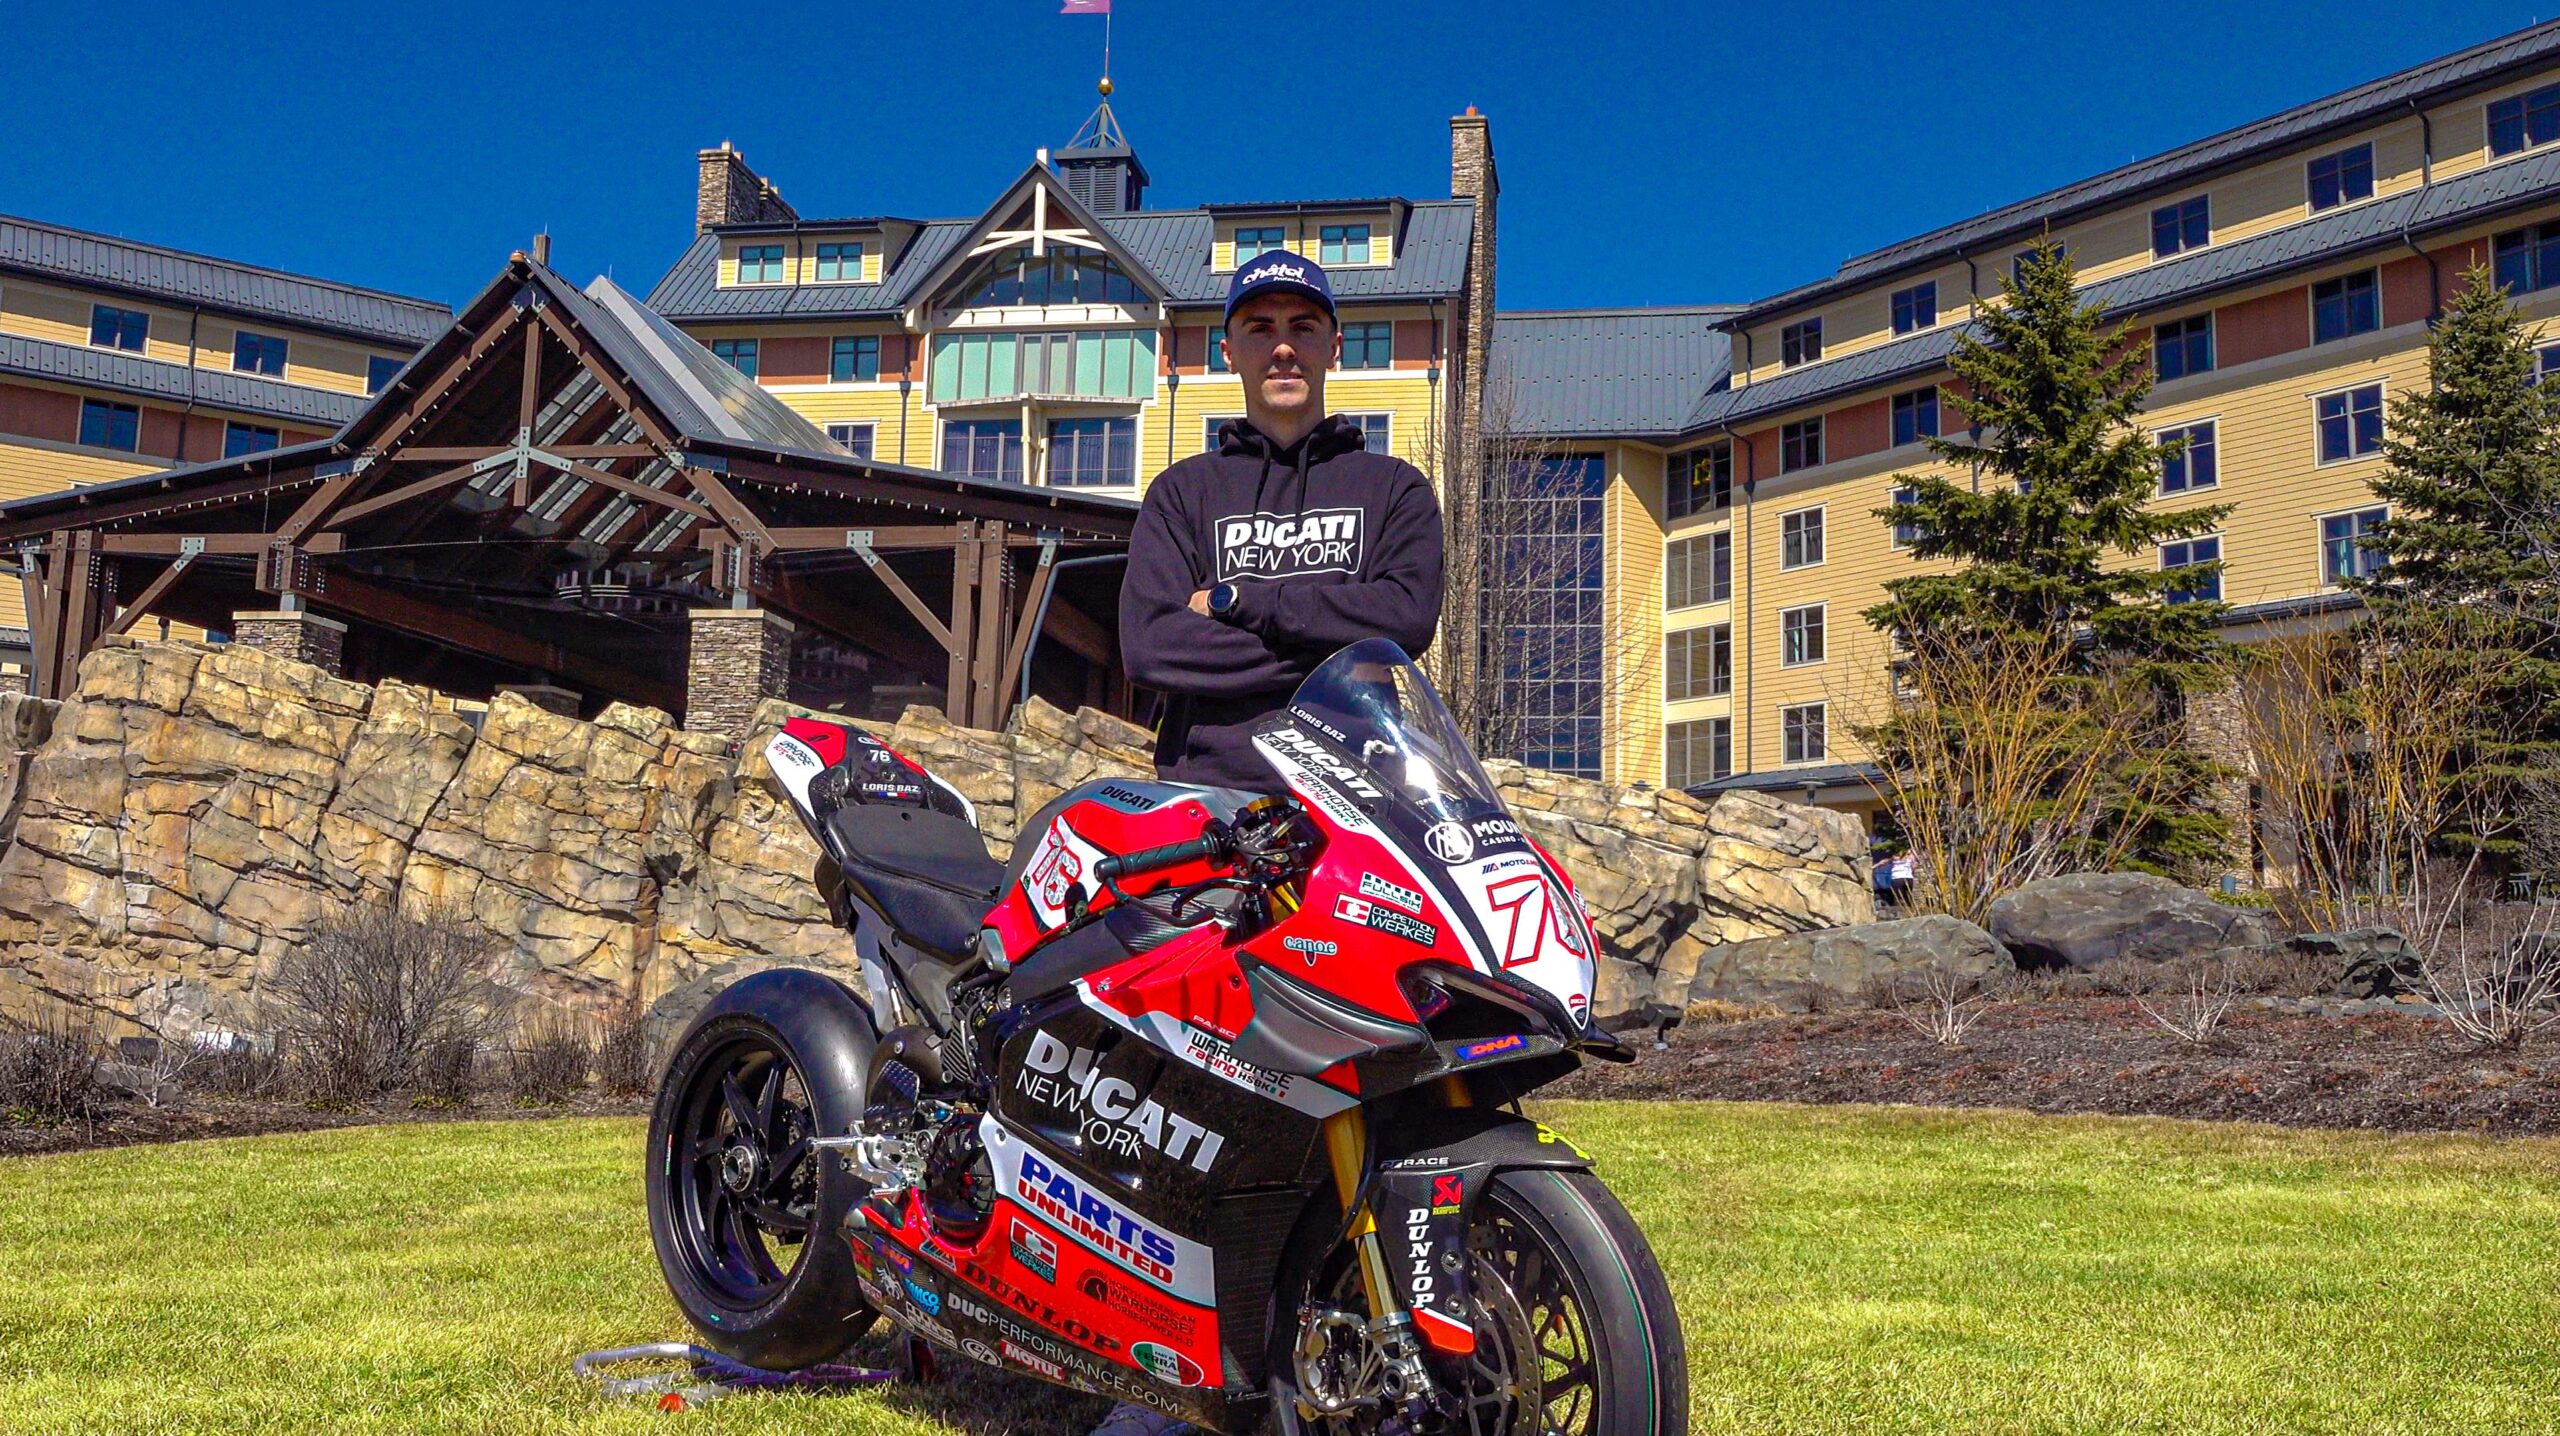 Warhorse HSBK Racing Ducati New York Confirms Parts Unlimited and Mount Airy Casino Resort as Key Sponsors